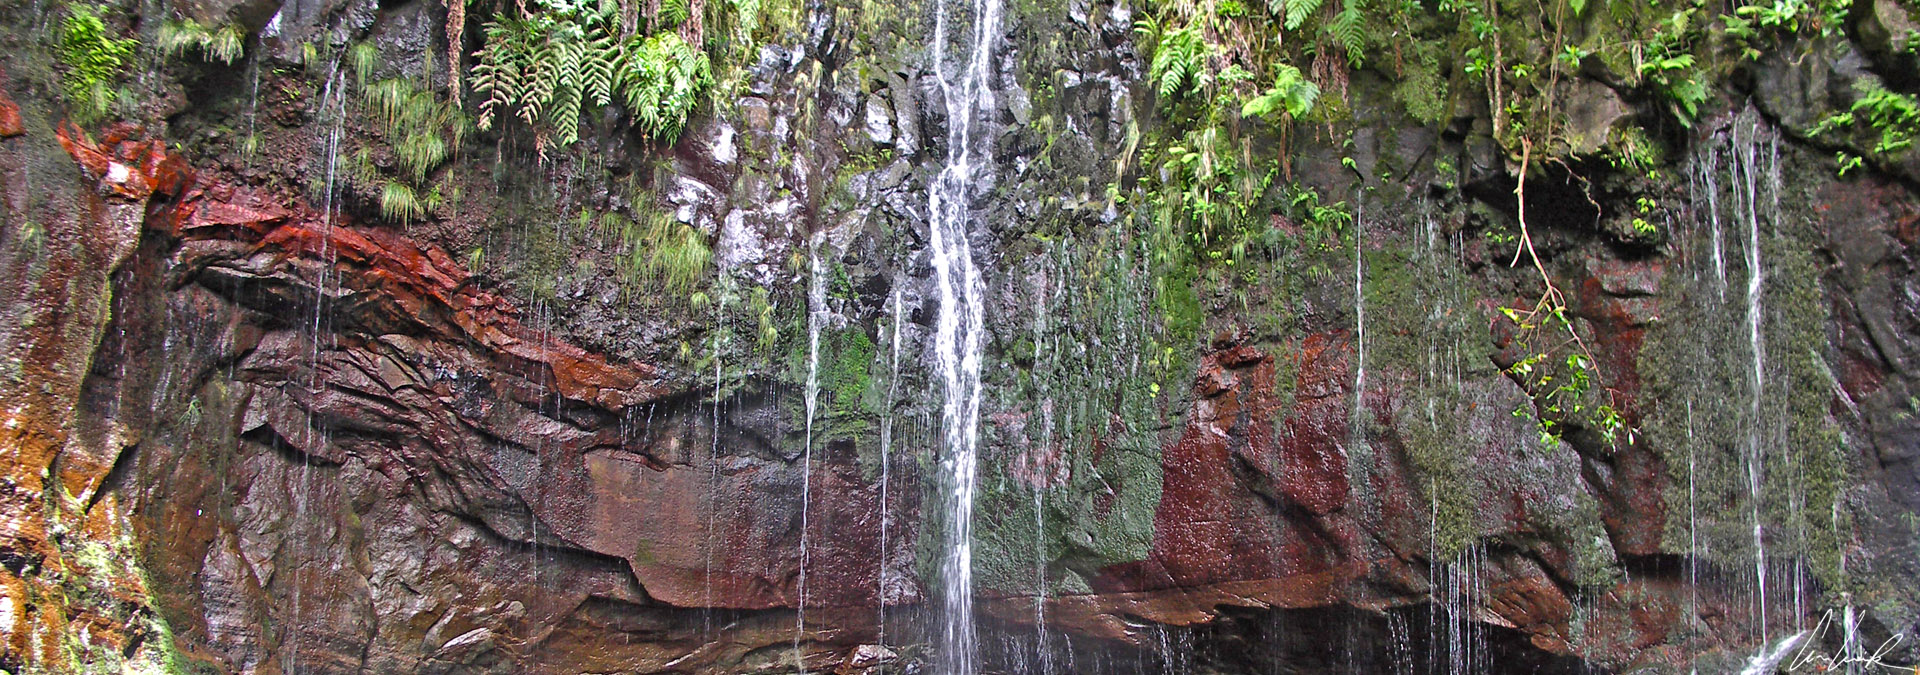 Madeira, levada of the 25 springs - Walls permanently bathed in runoff water with endemic and hygrophilic plant species.